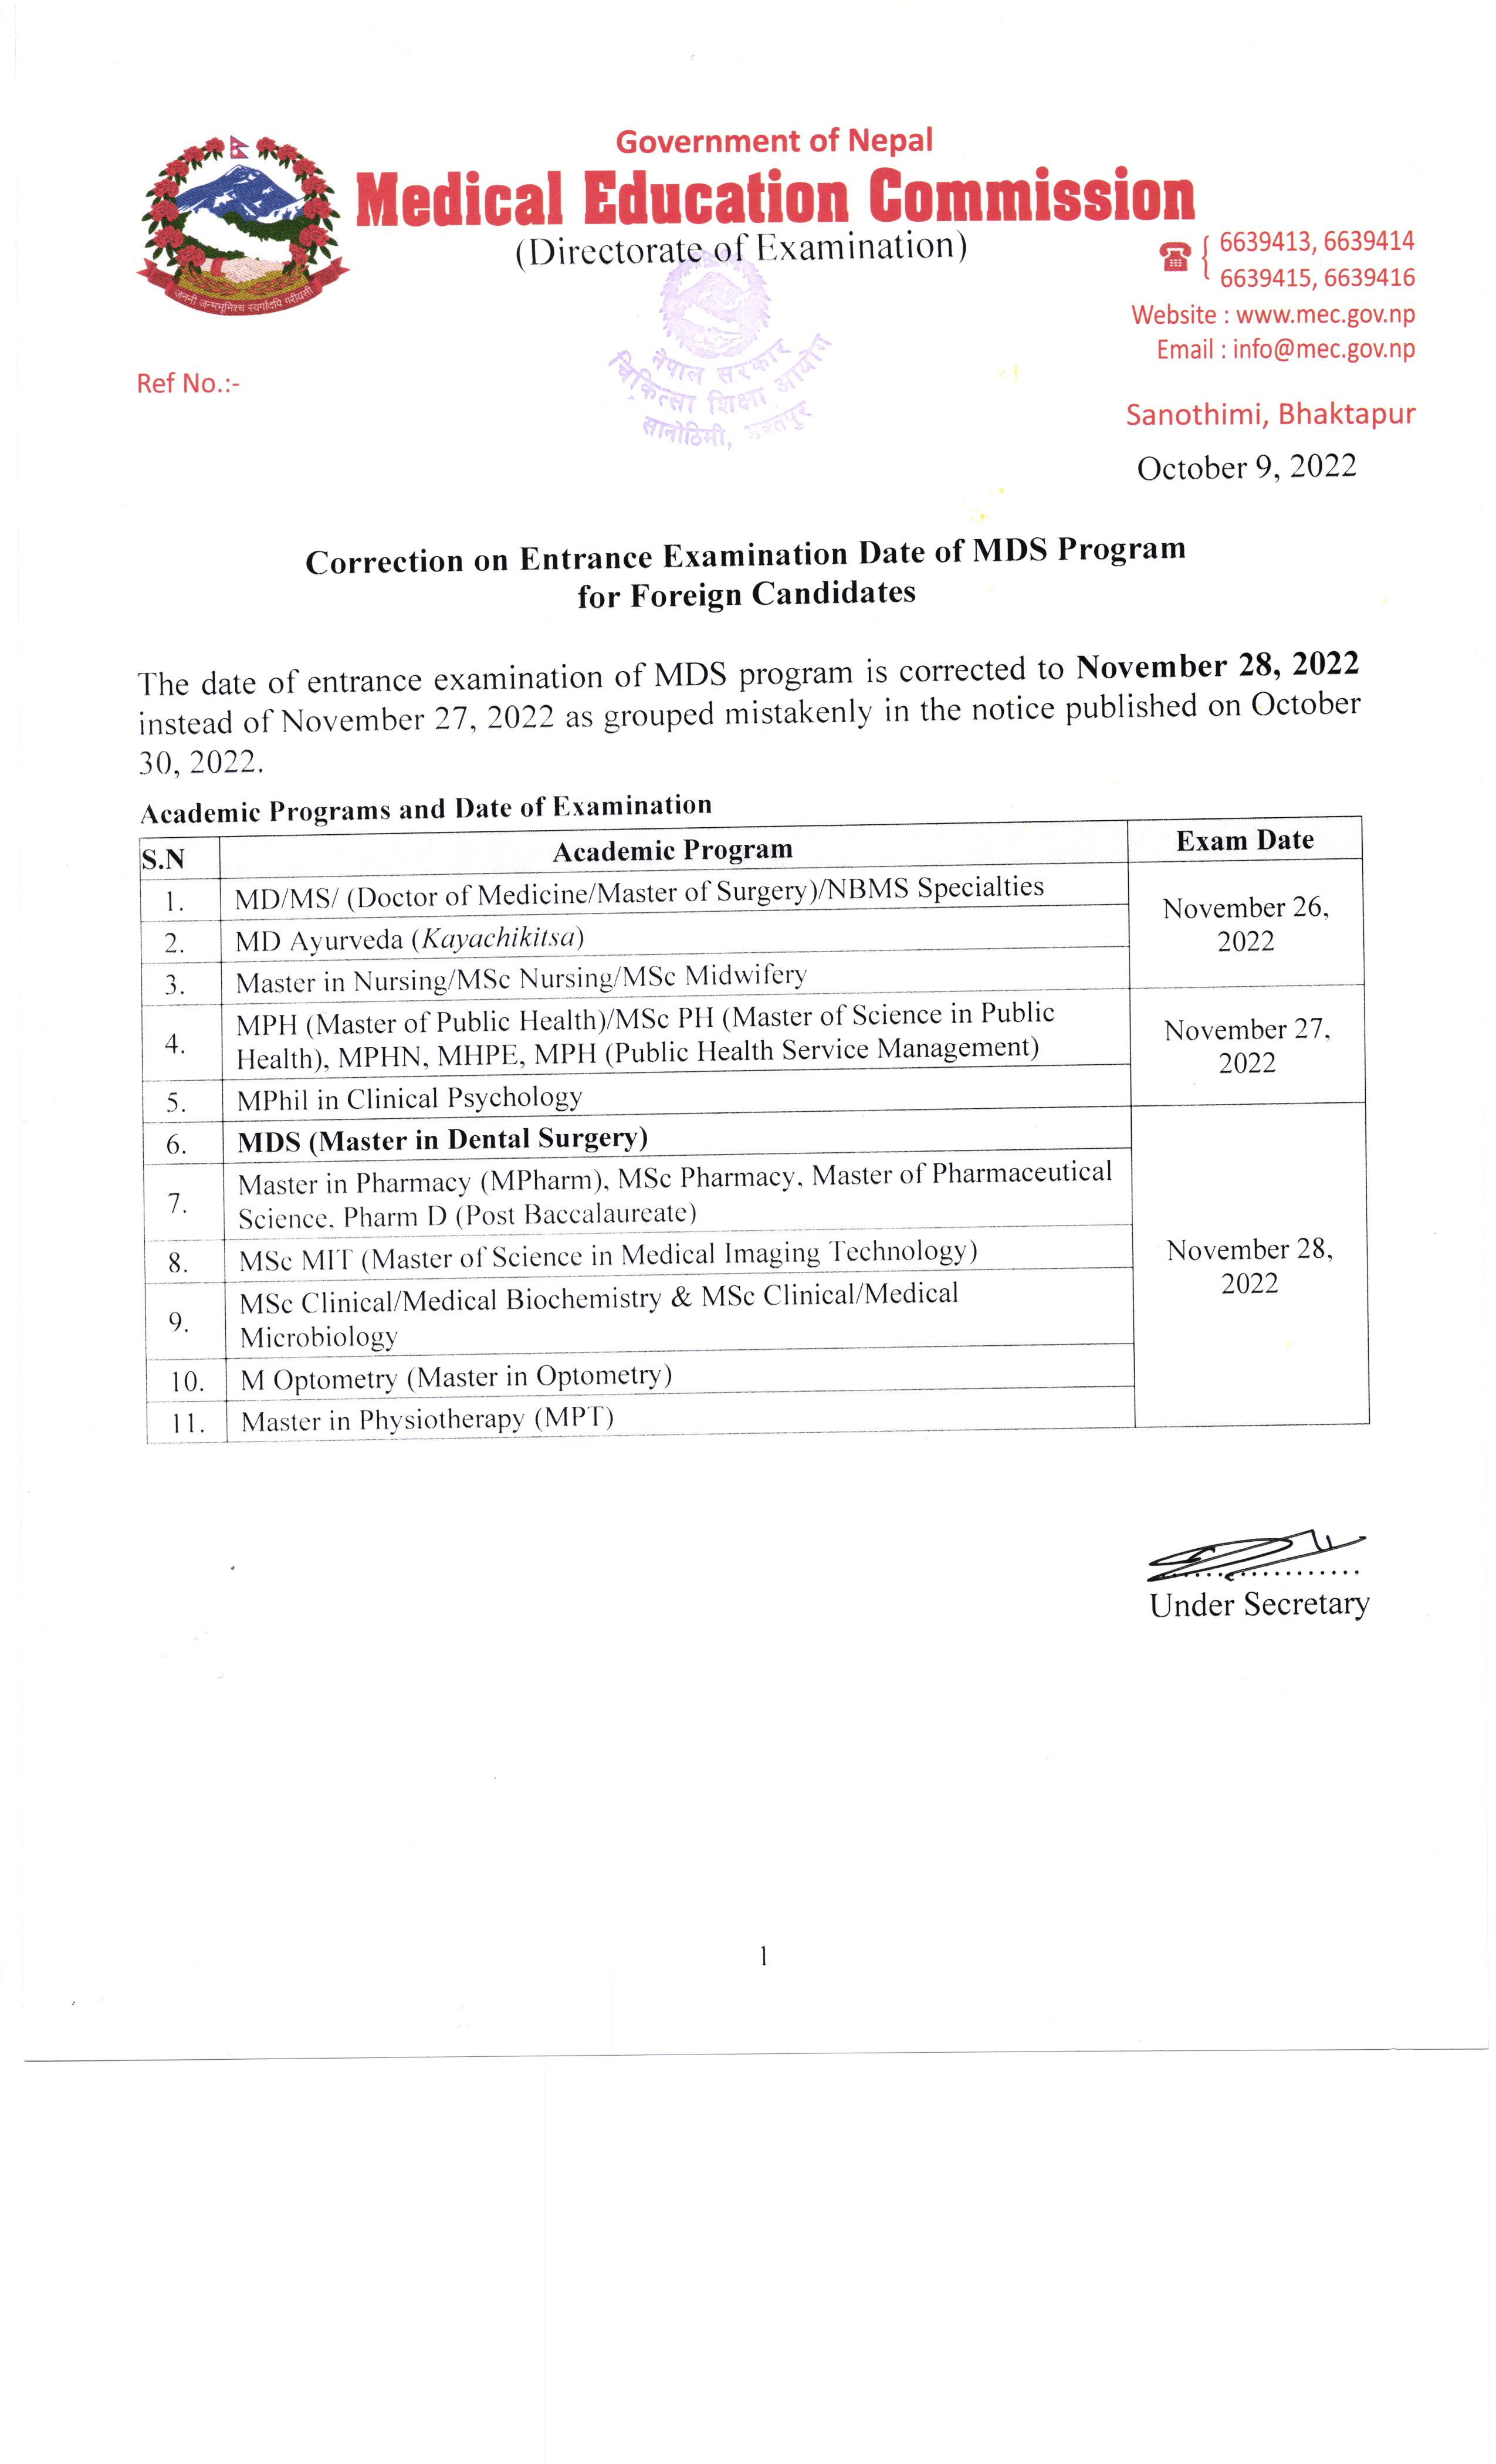 Correction on Examination Date of MDS Program for Foreign Candidates